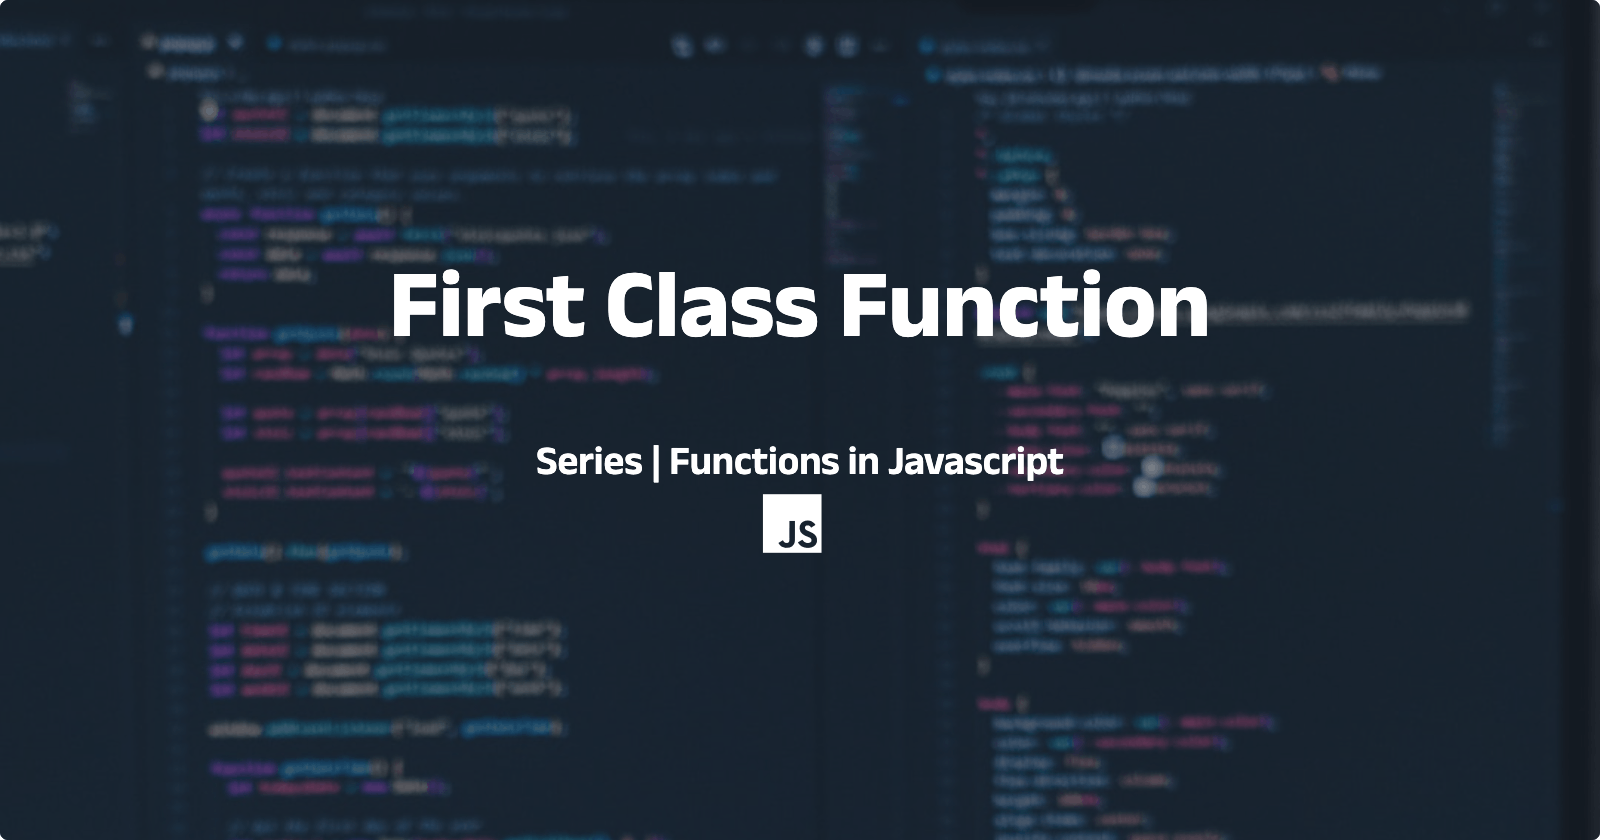 First Class Function in JS